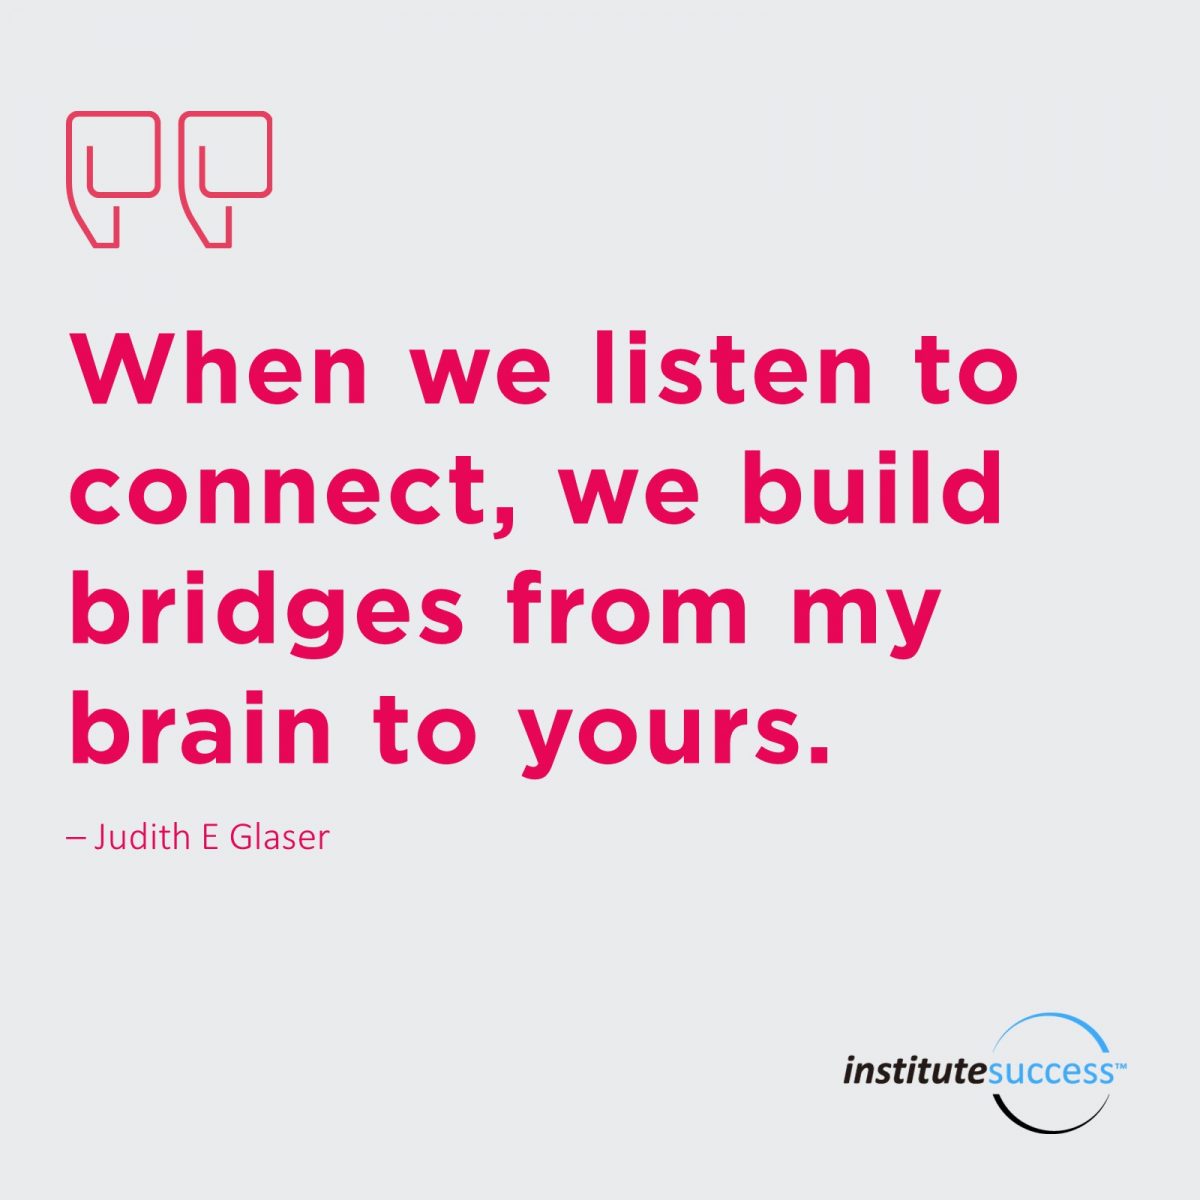 When we listen to connect, we build bridges from my brain to yours. 	Judith E Glaser